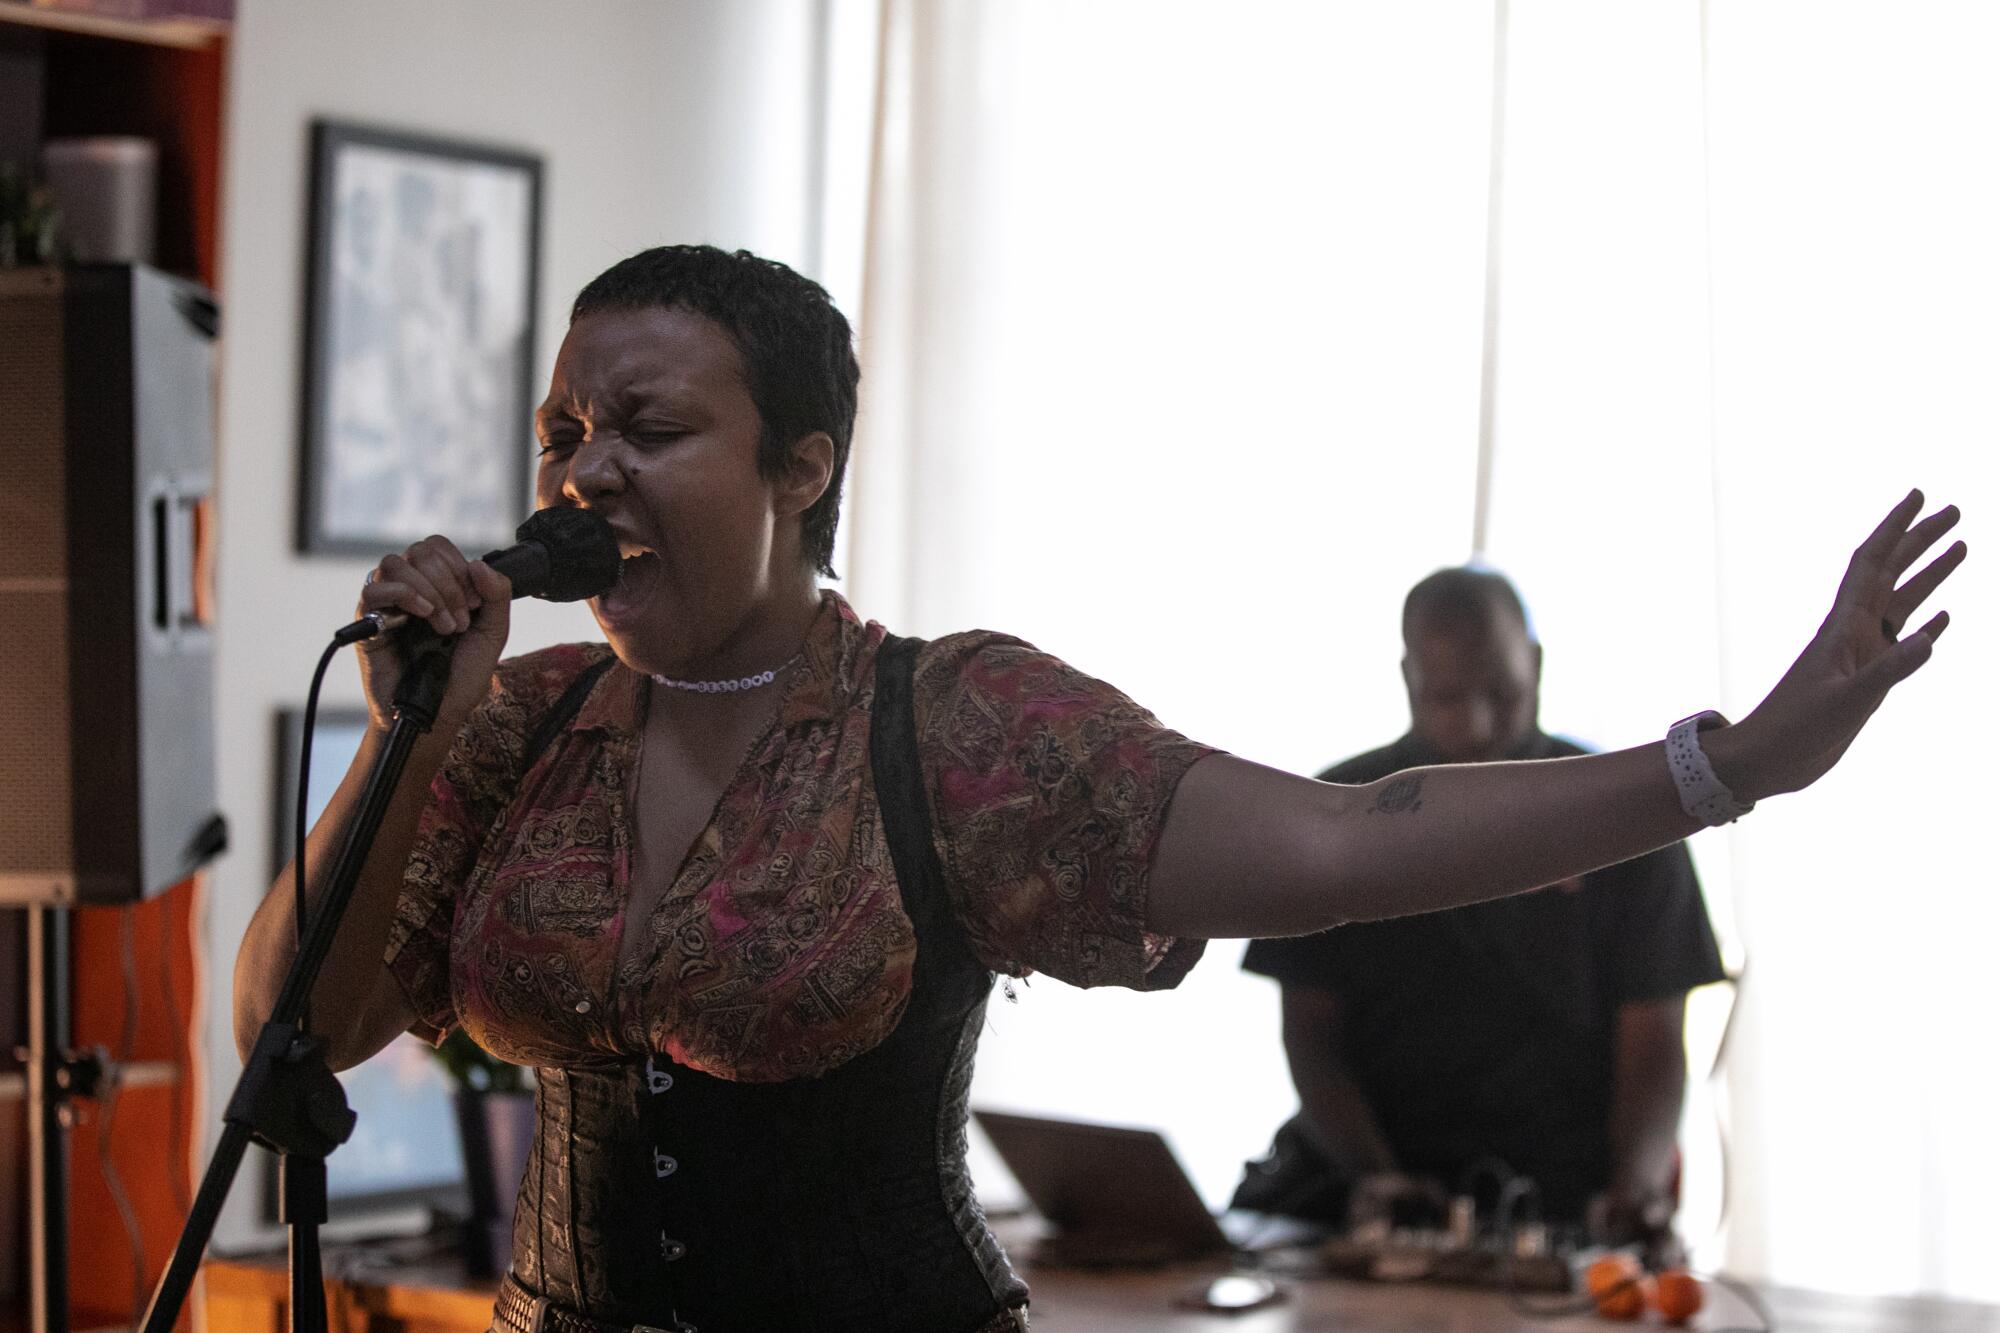 A Black woman sings into a microphone.